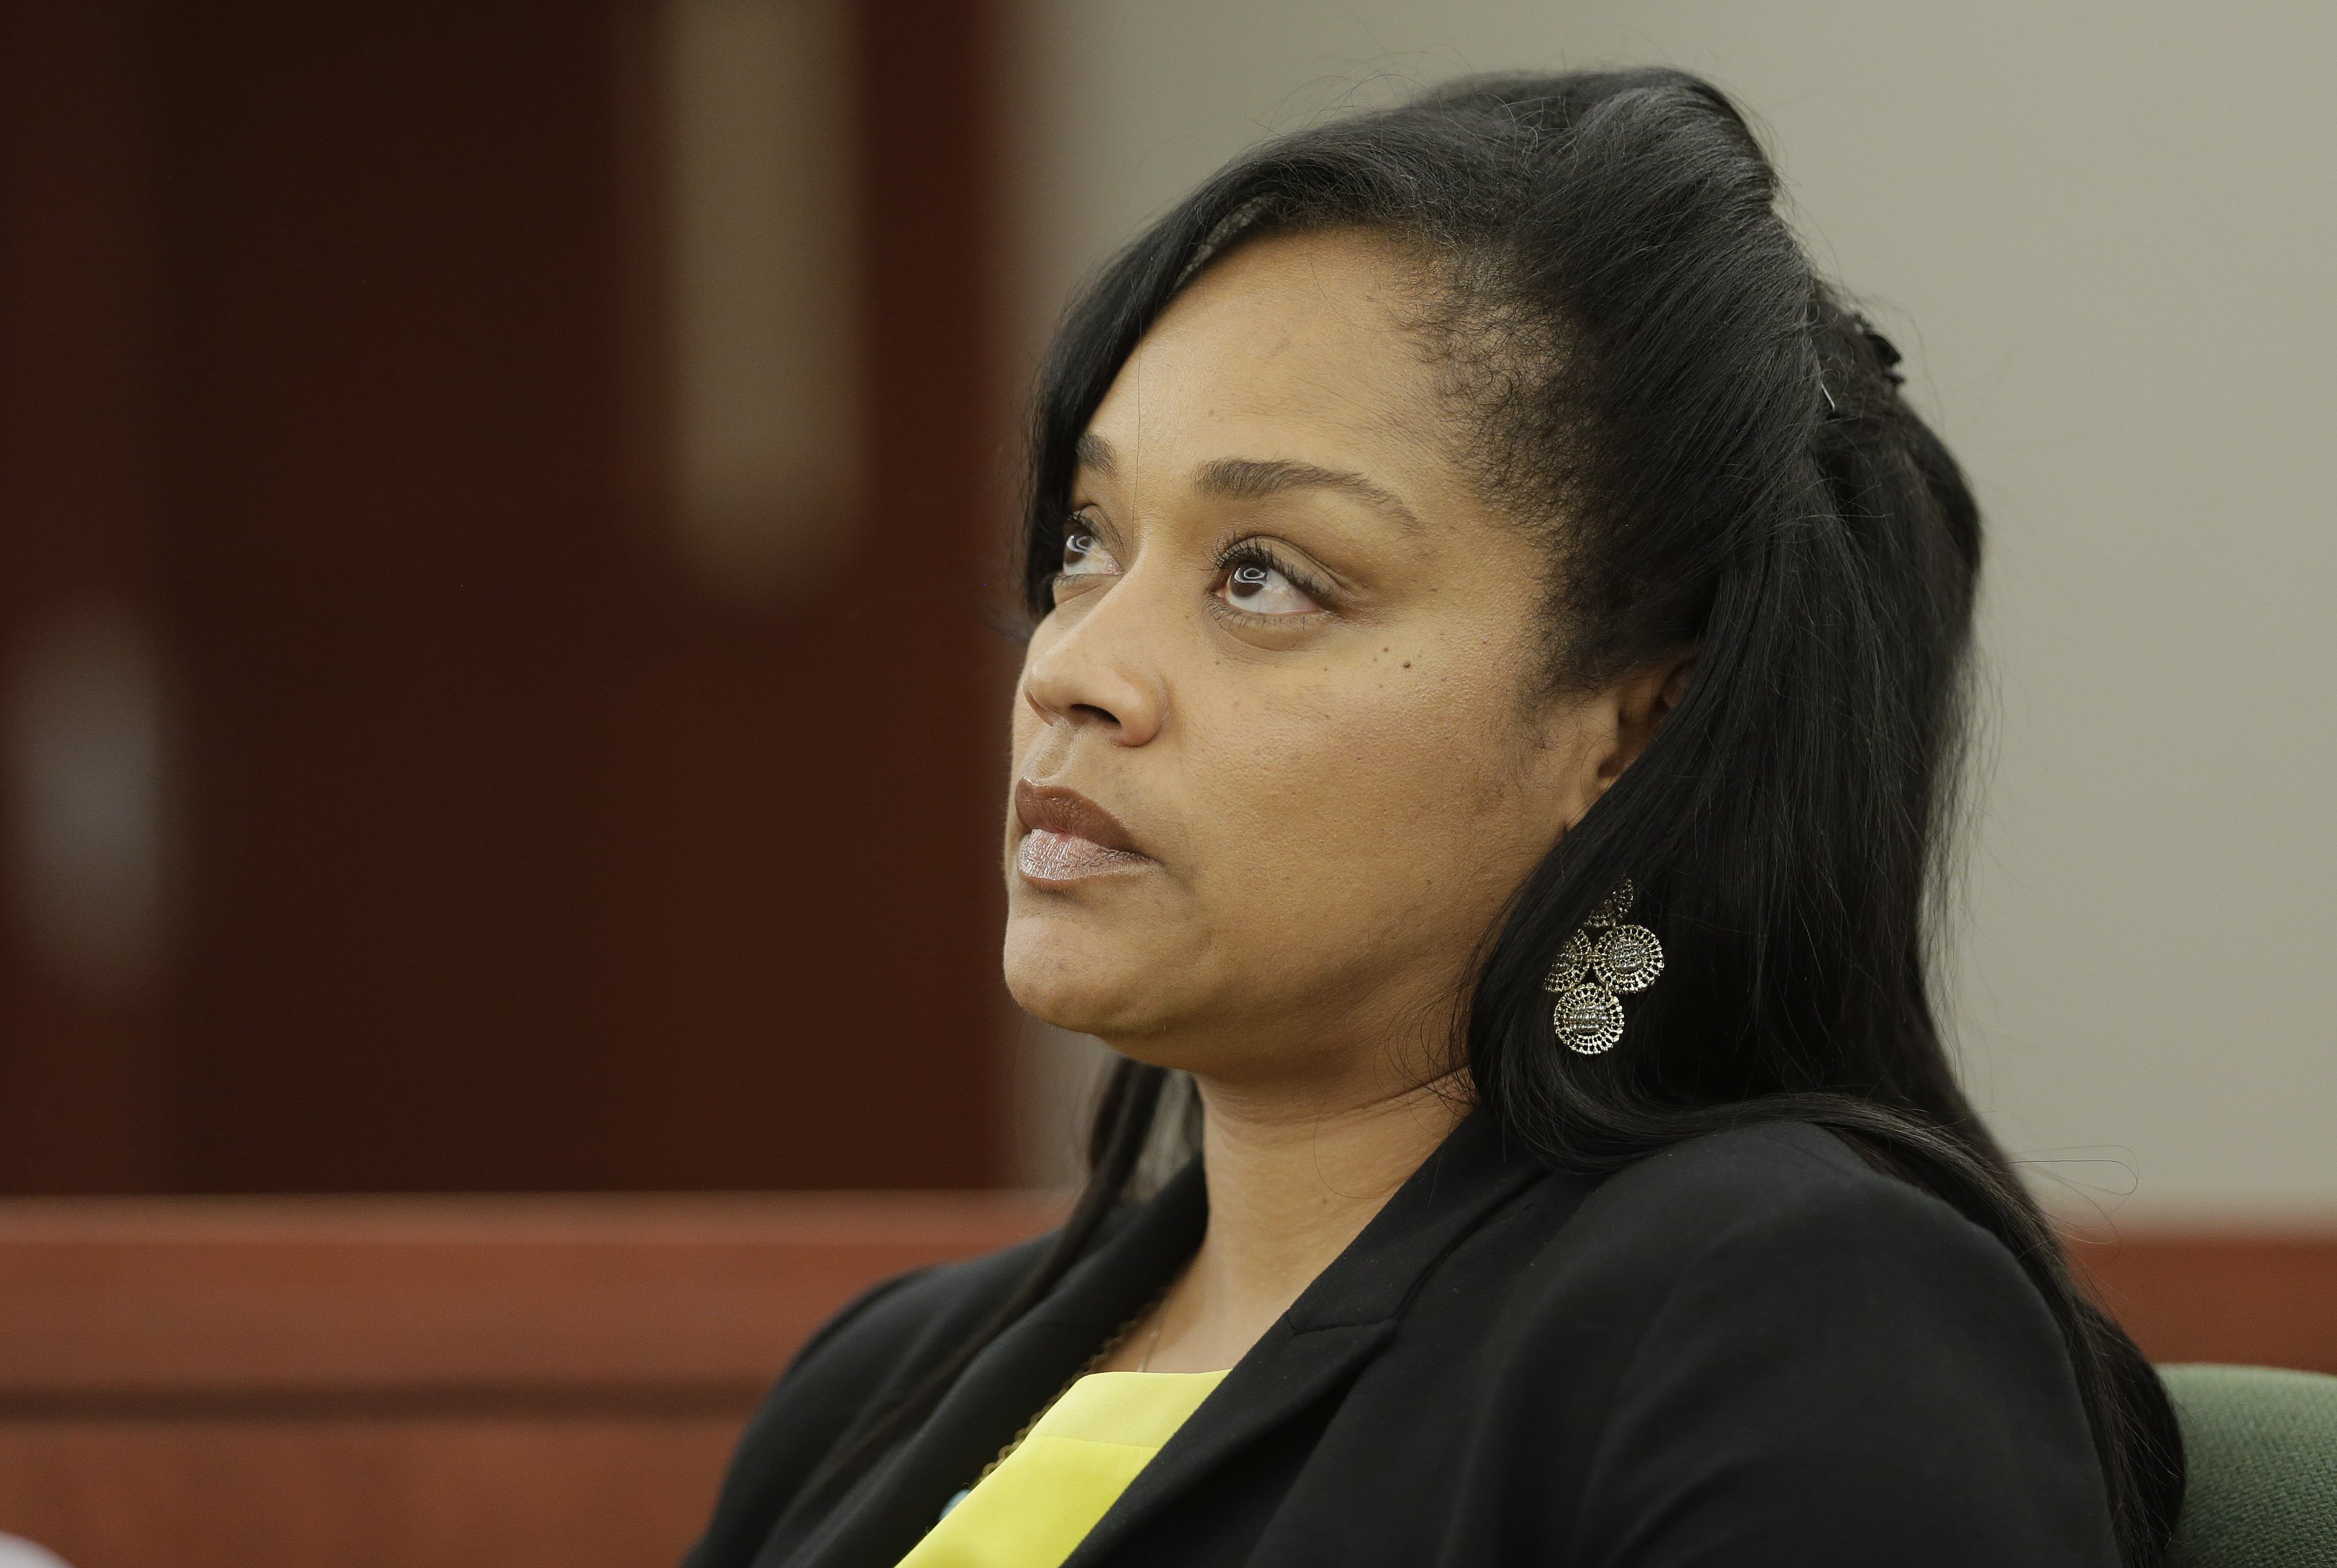 Arnelle Simpson at the Clark County District Court evidentiary hearing on May 13, 2013, in Las Vegas, Nevada. | Source: Getty Images